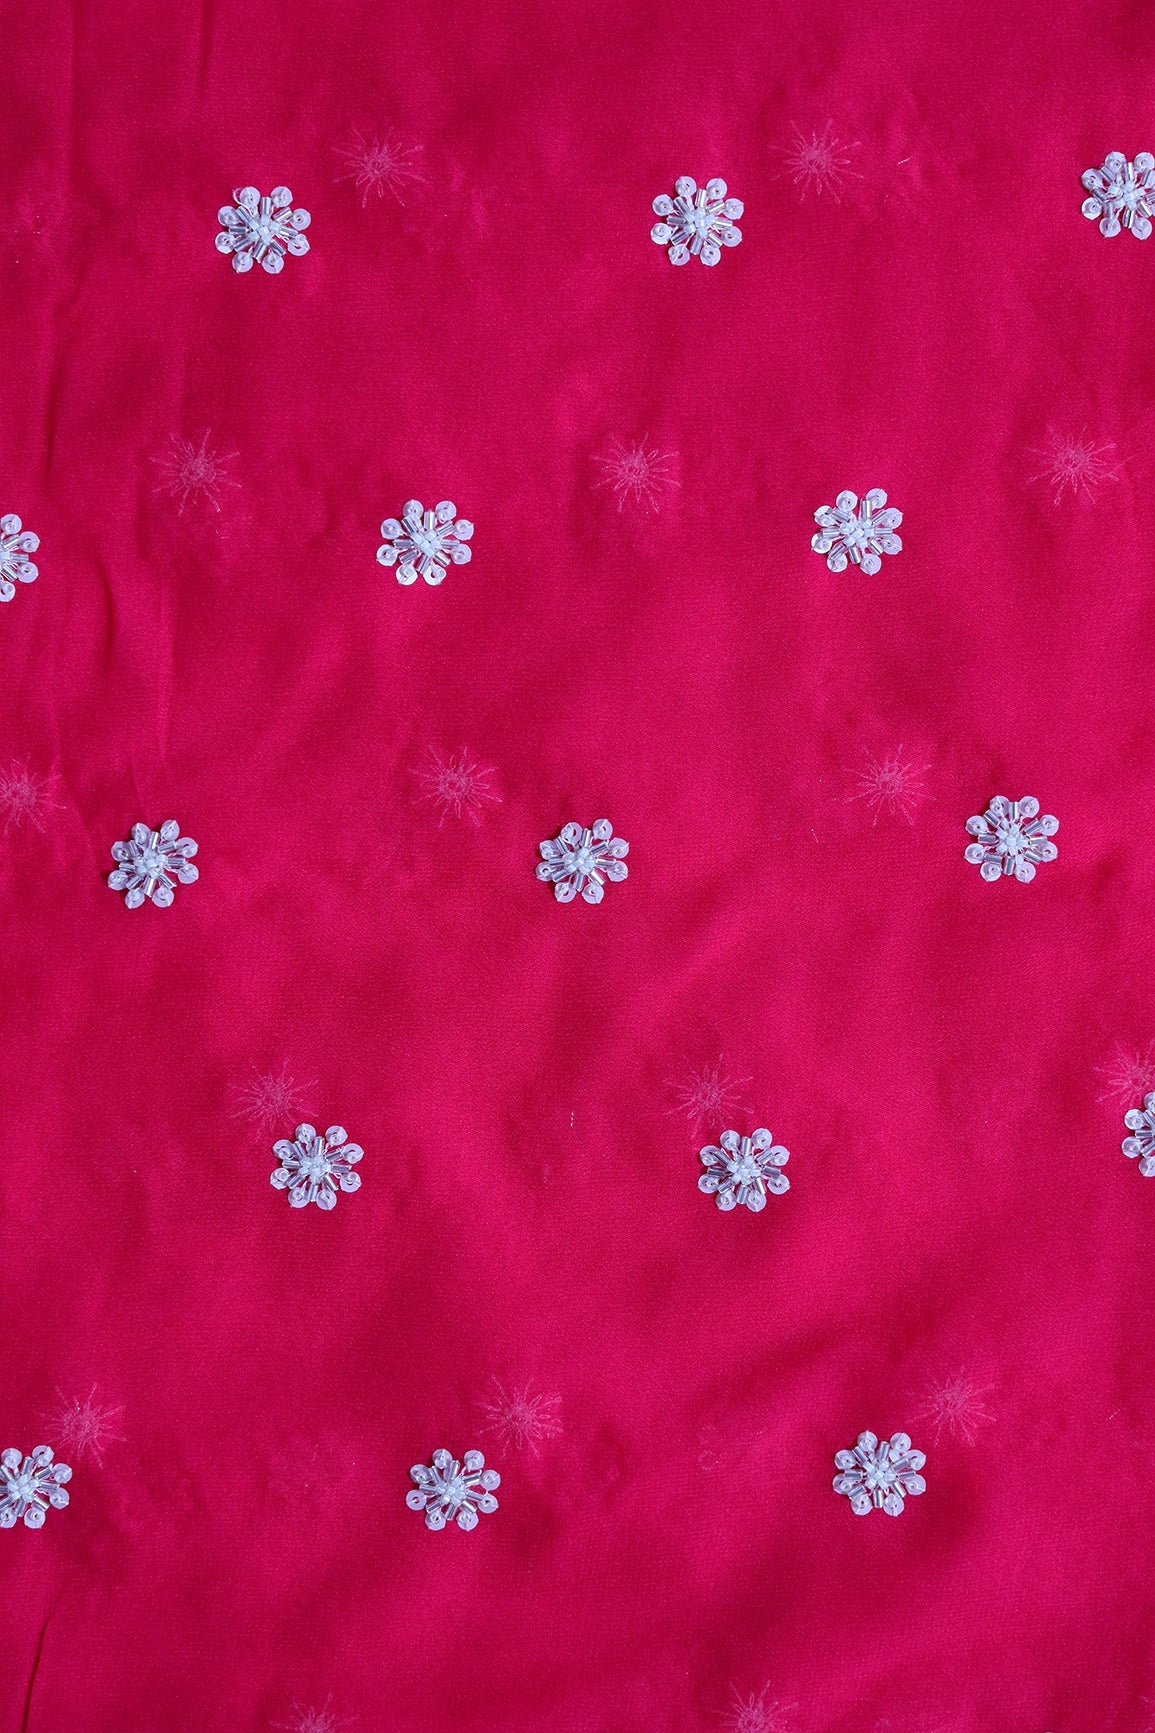 Silver Beads With Sequins Small Floral Handwork Embroidery On Fuchsia Viscose Georgette Fabric